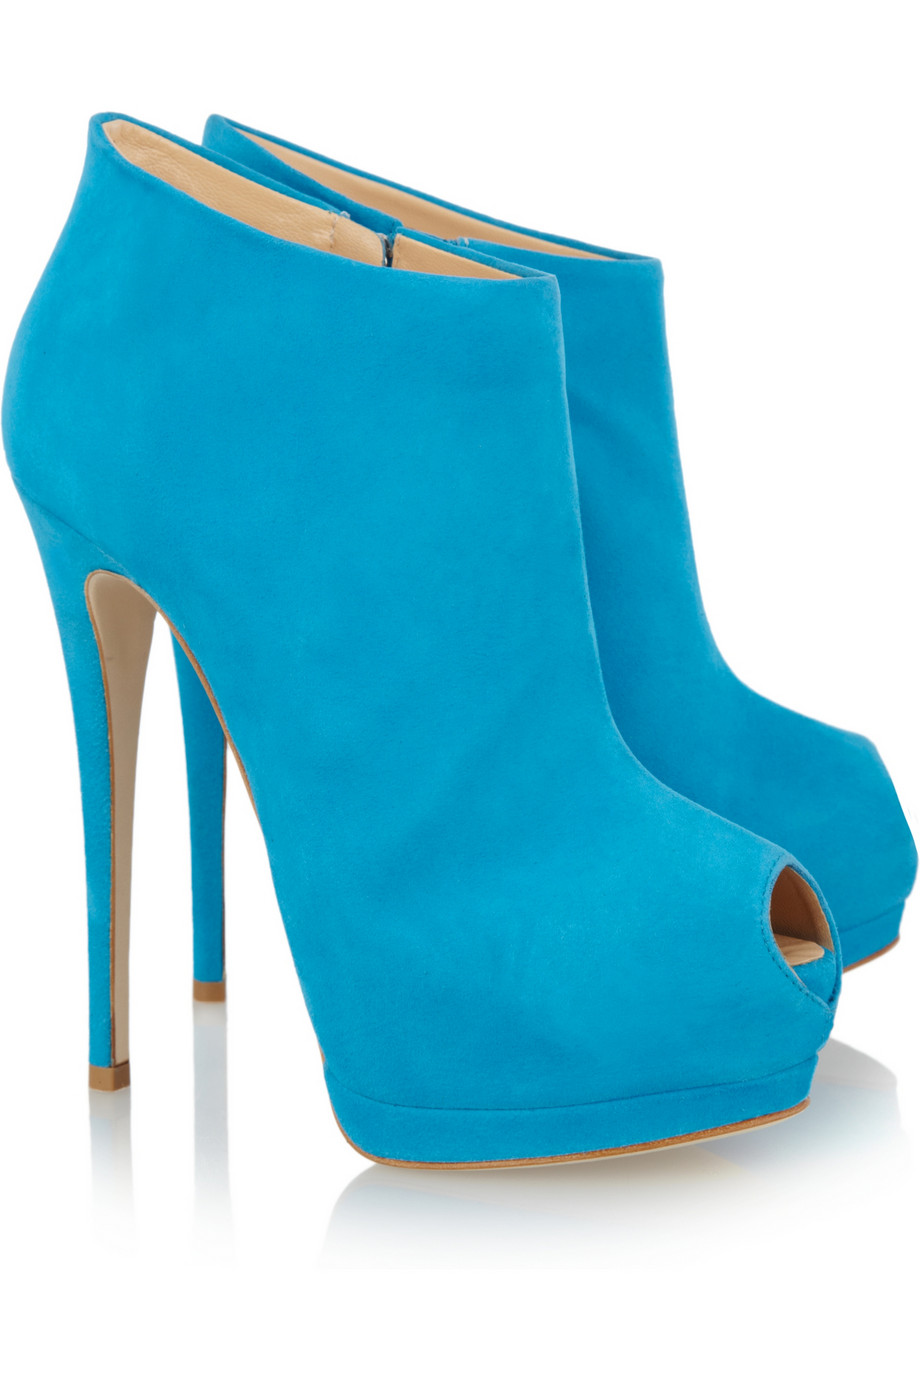 Shoeniverse: Bright blue suede peep toe ankle boots from Giuseppe Zanotti Sharon in GREEN!